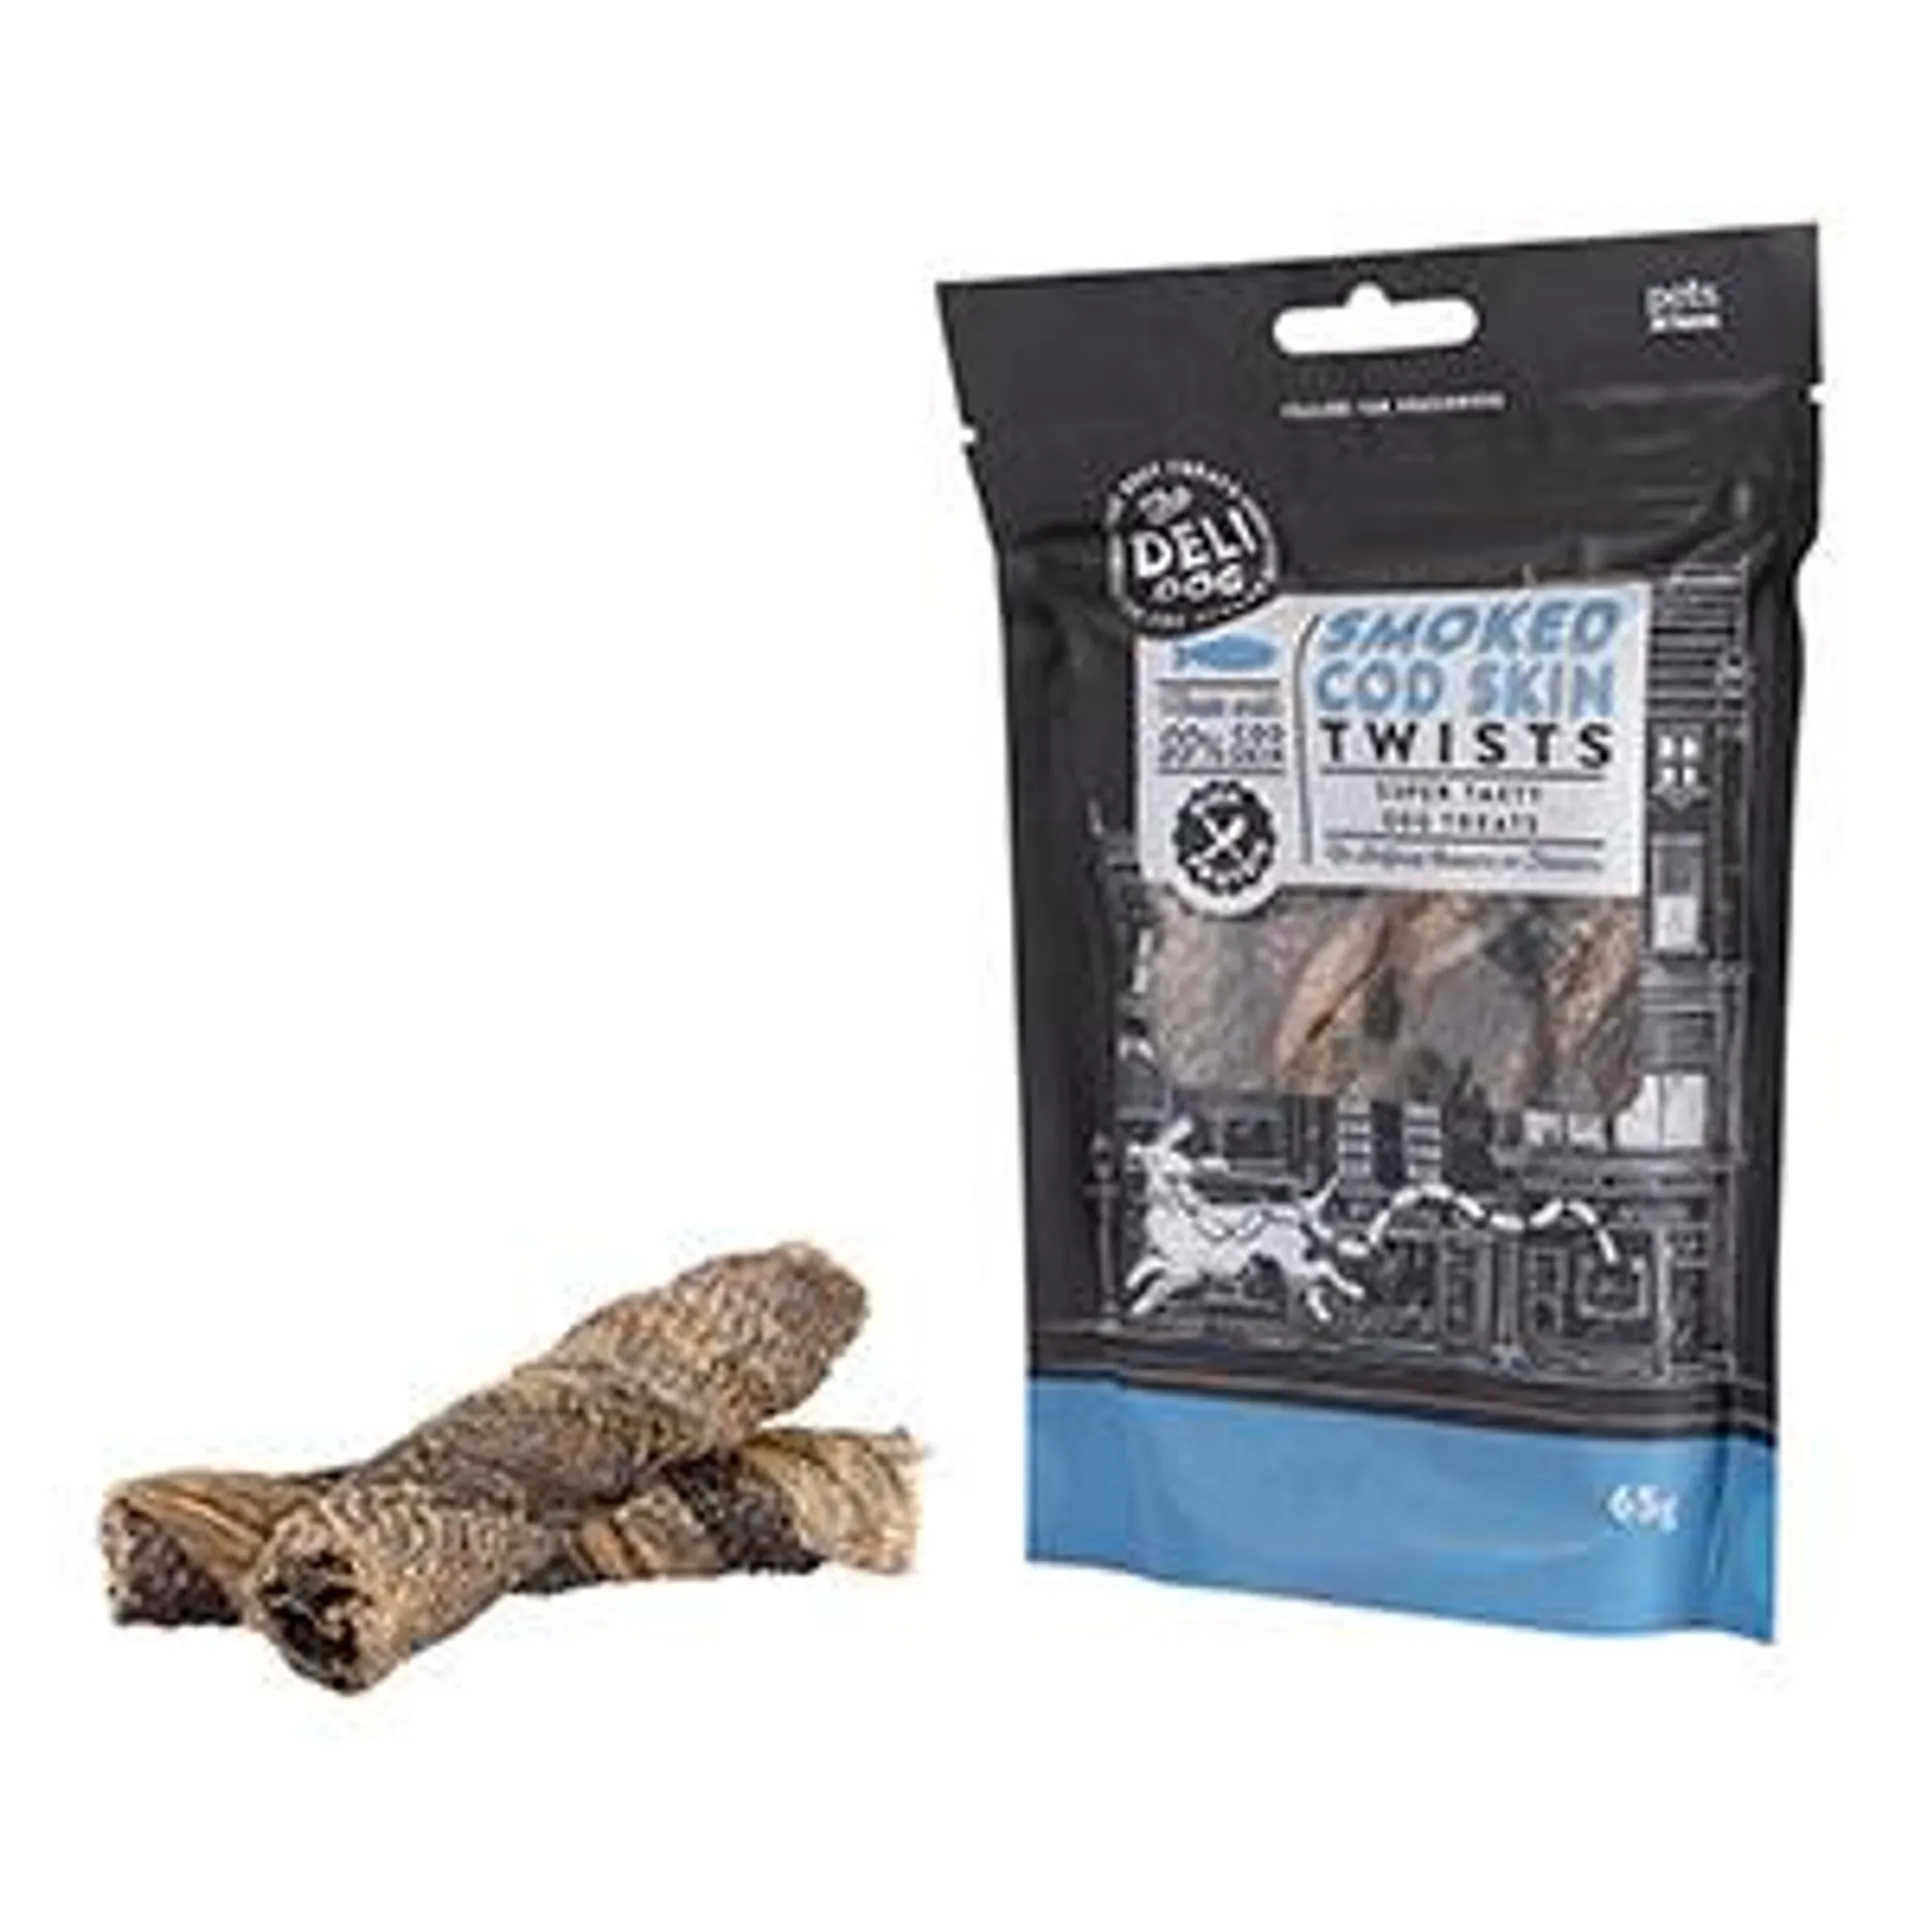 Pets at Home The Deli Adult Dog Treats Smoked Cod Skin Twists 65g